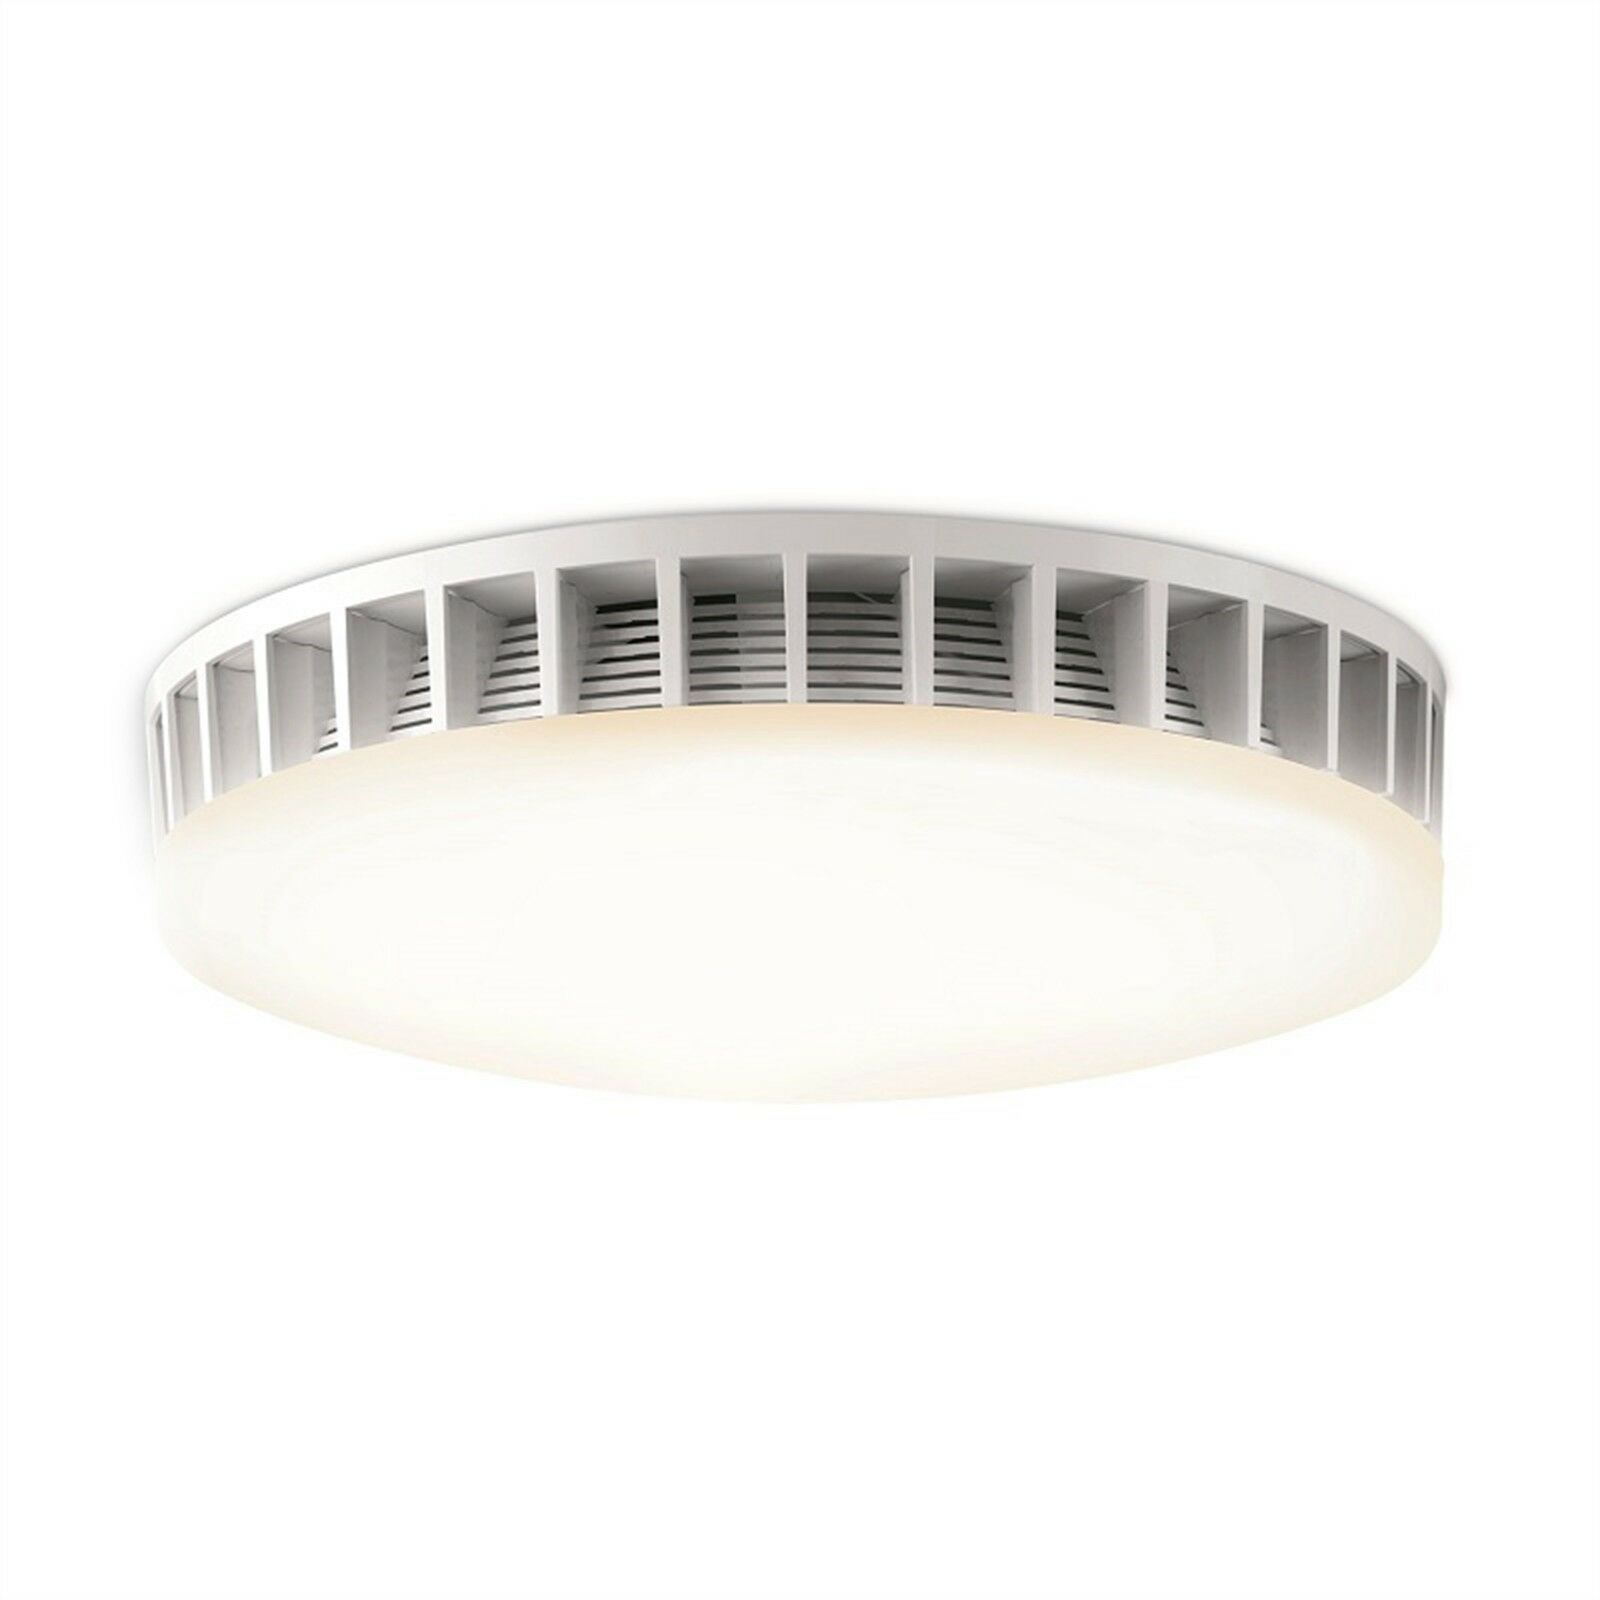 Hpm Exhaust Fan With Led Light R620led 38w 300mm Diameter Round Ceiling Mounted in dimensions 1600 X 1600